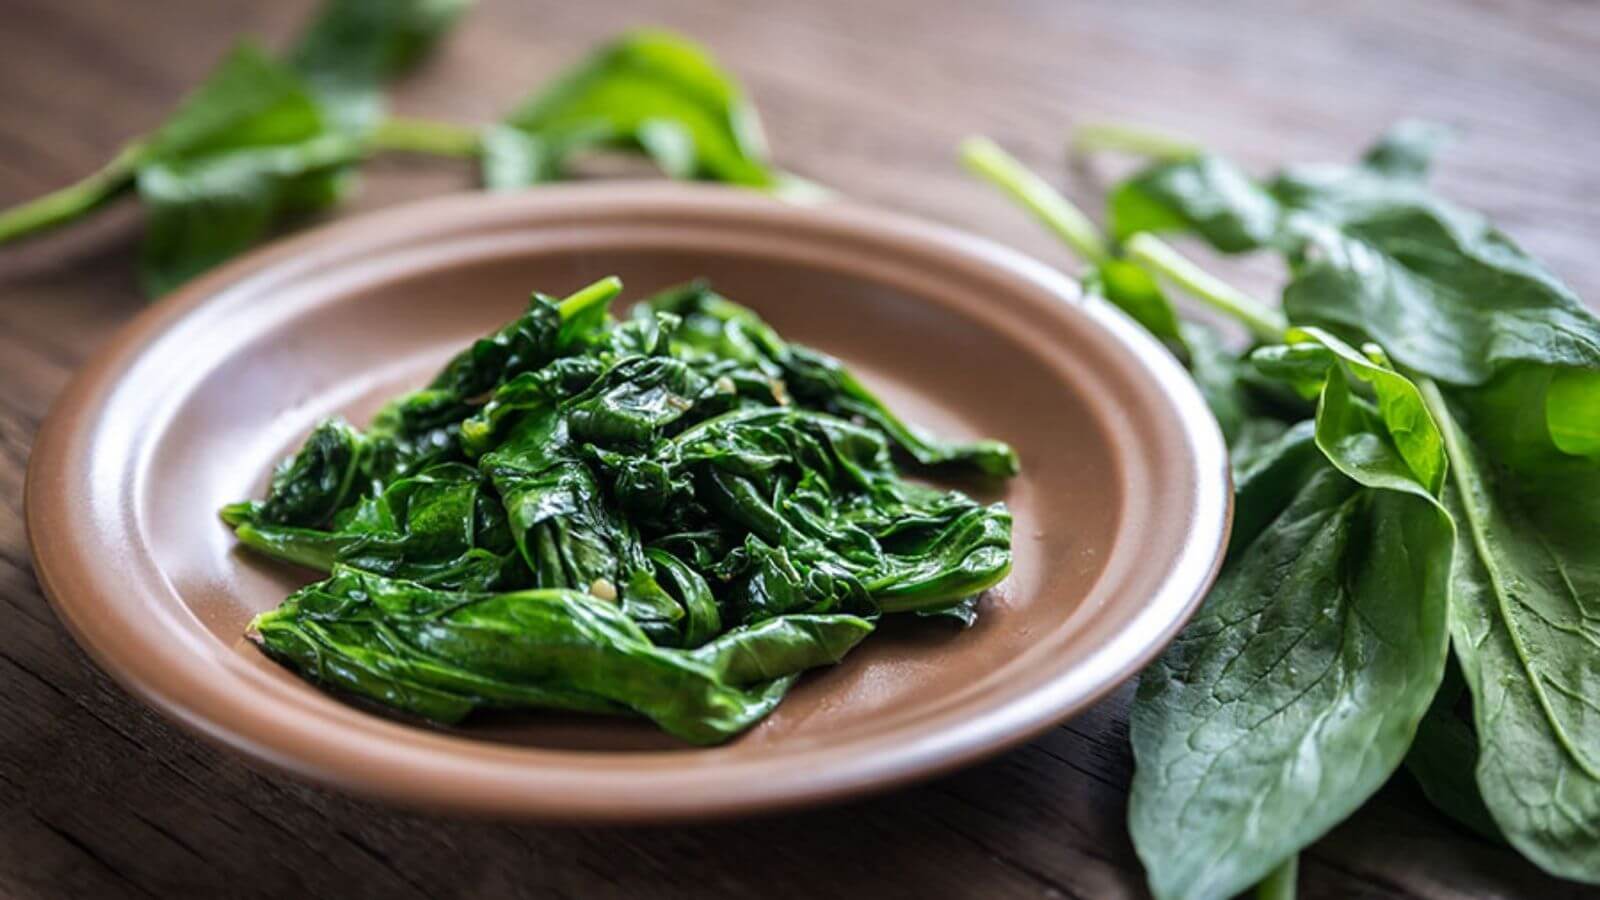 sautéed spinach on a plate surrounded by spinach leaves